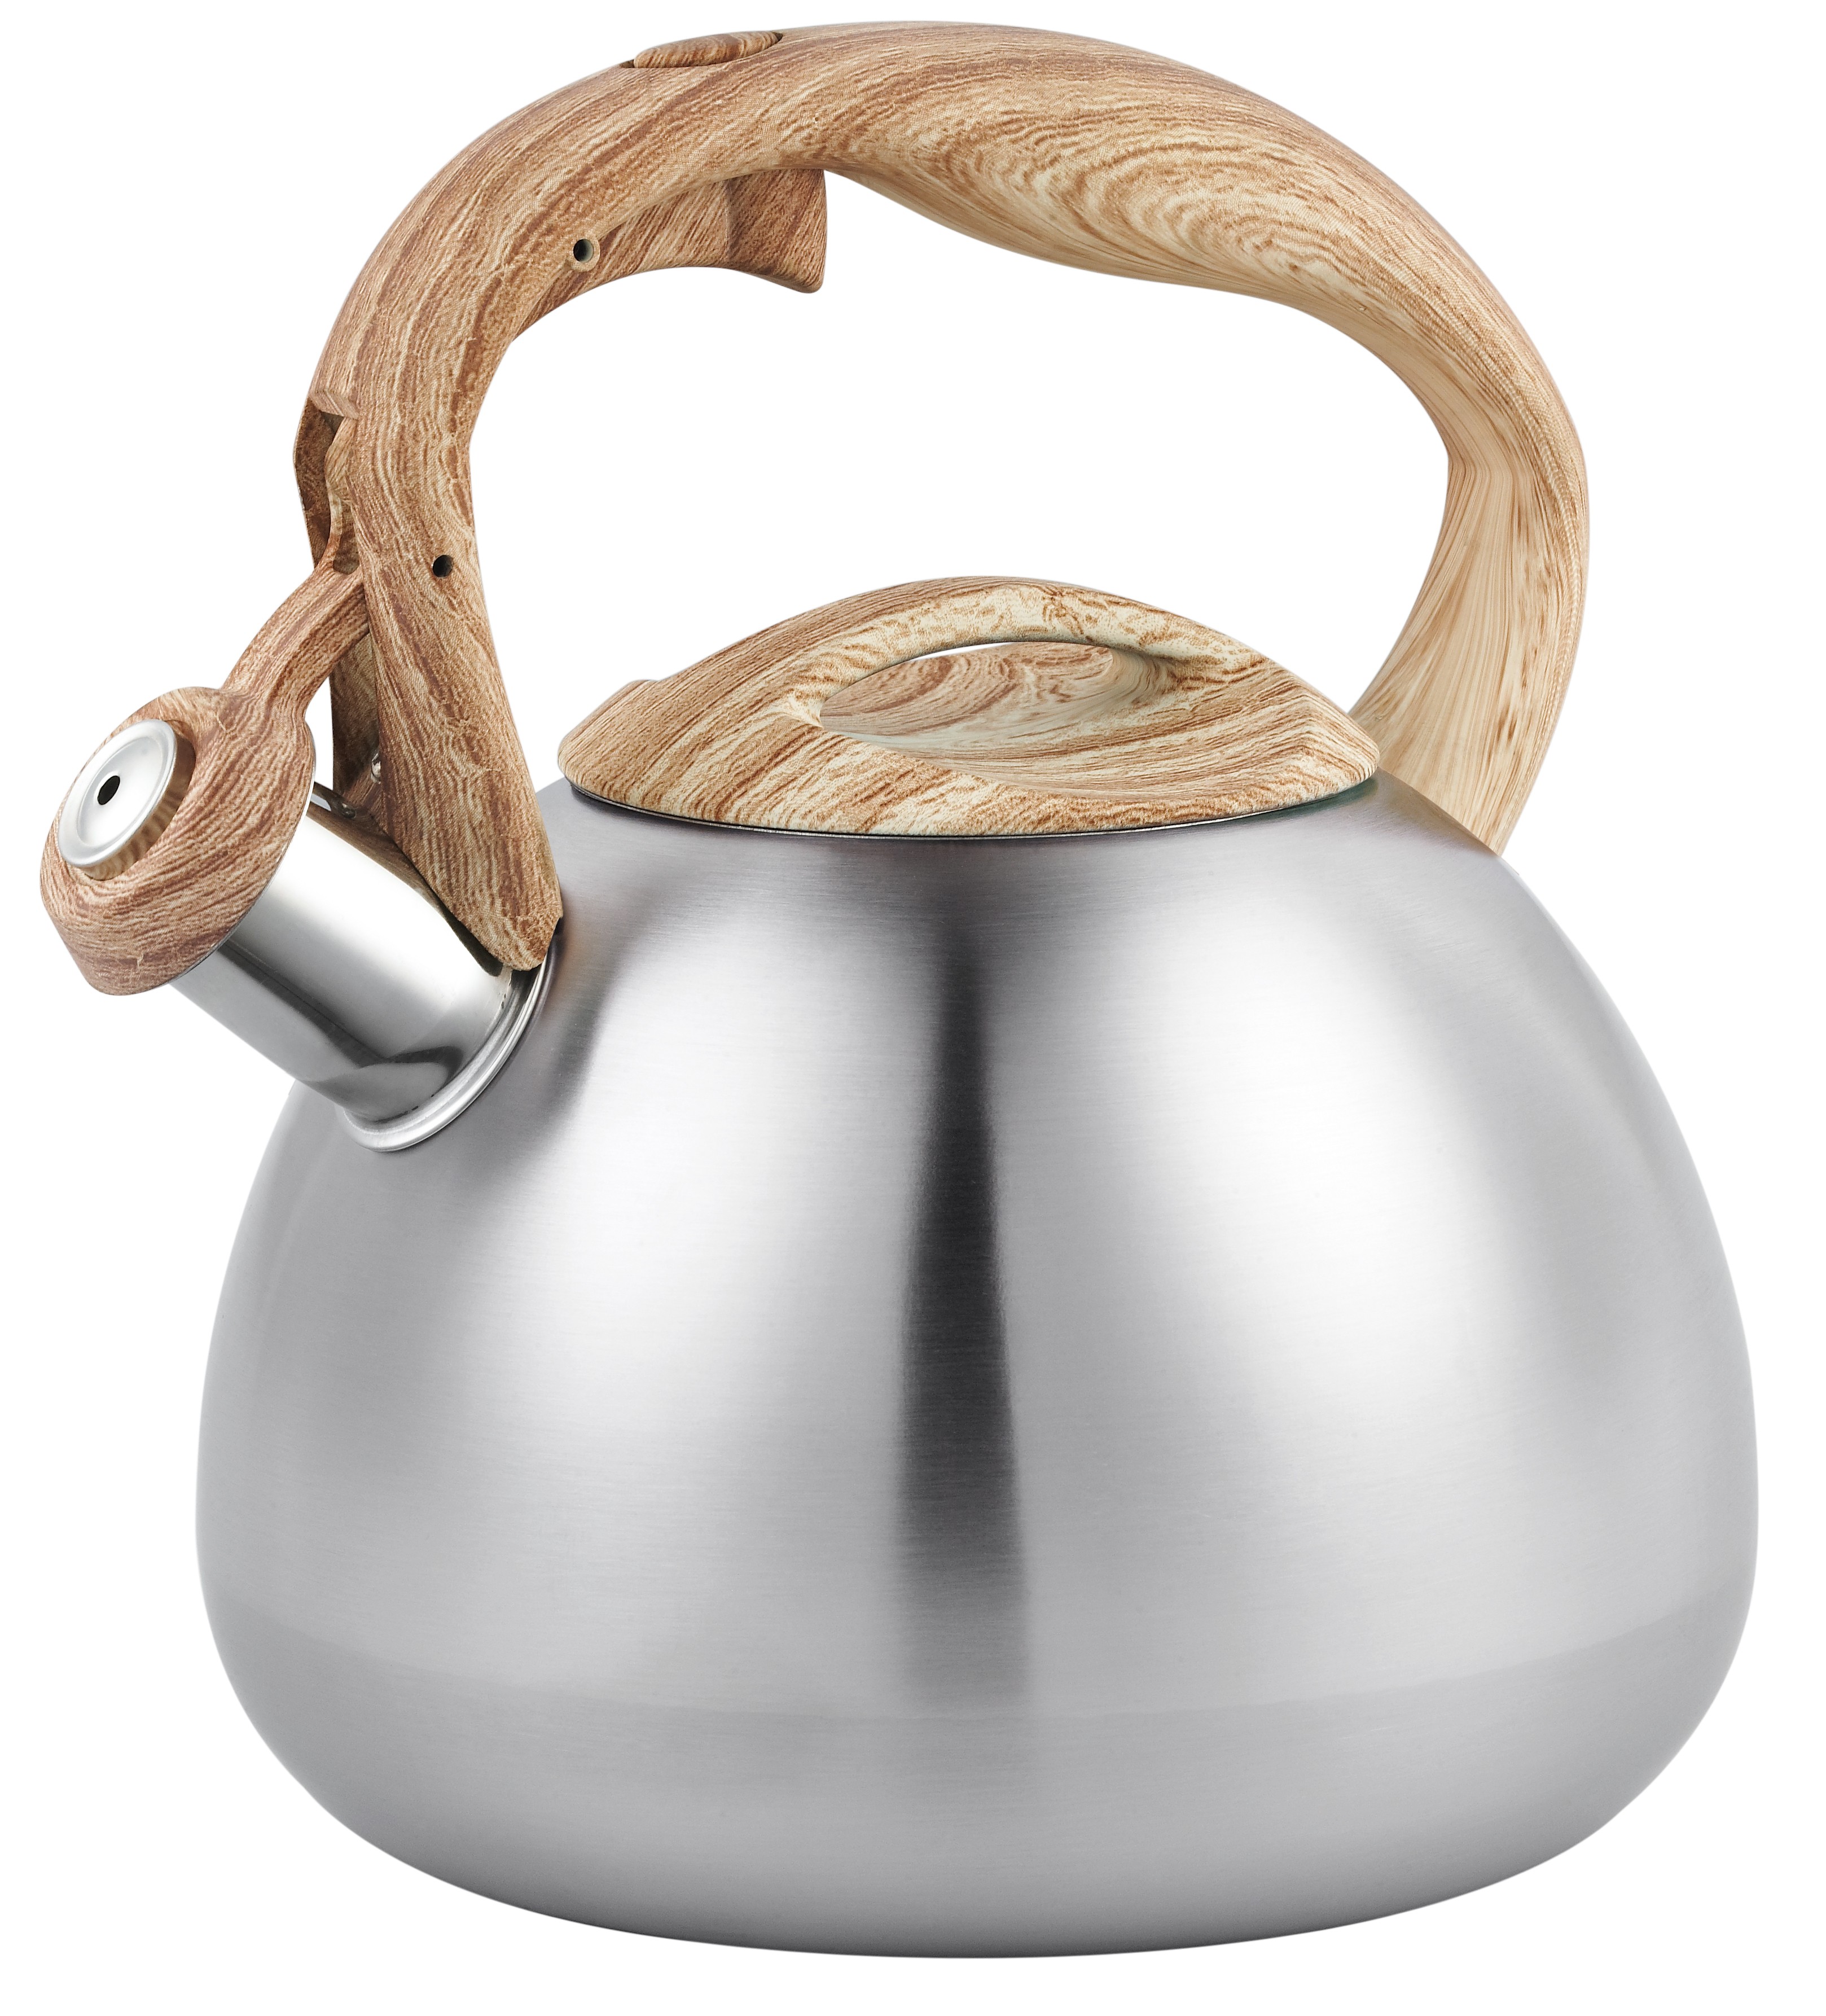 Exploring the Whistling Kettle and the Best Whistling Tea Kettle